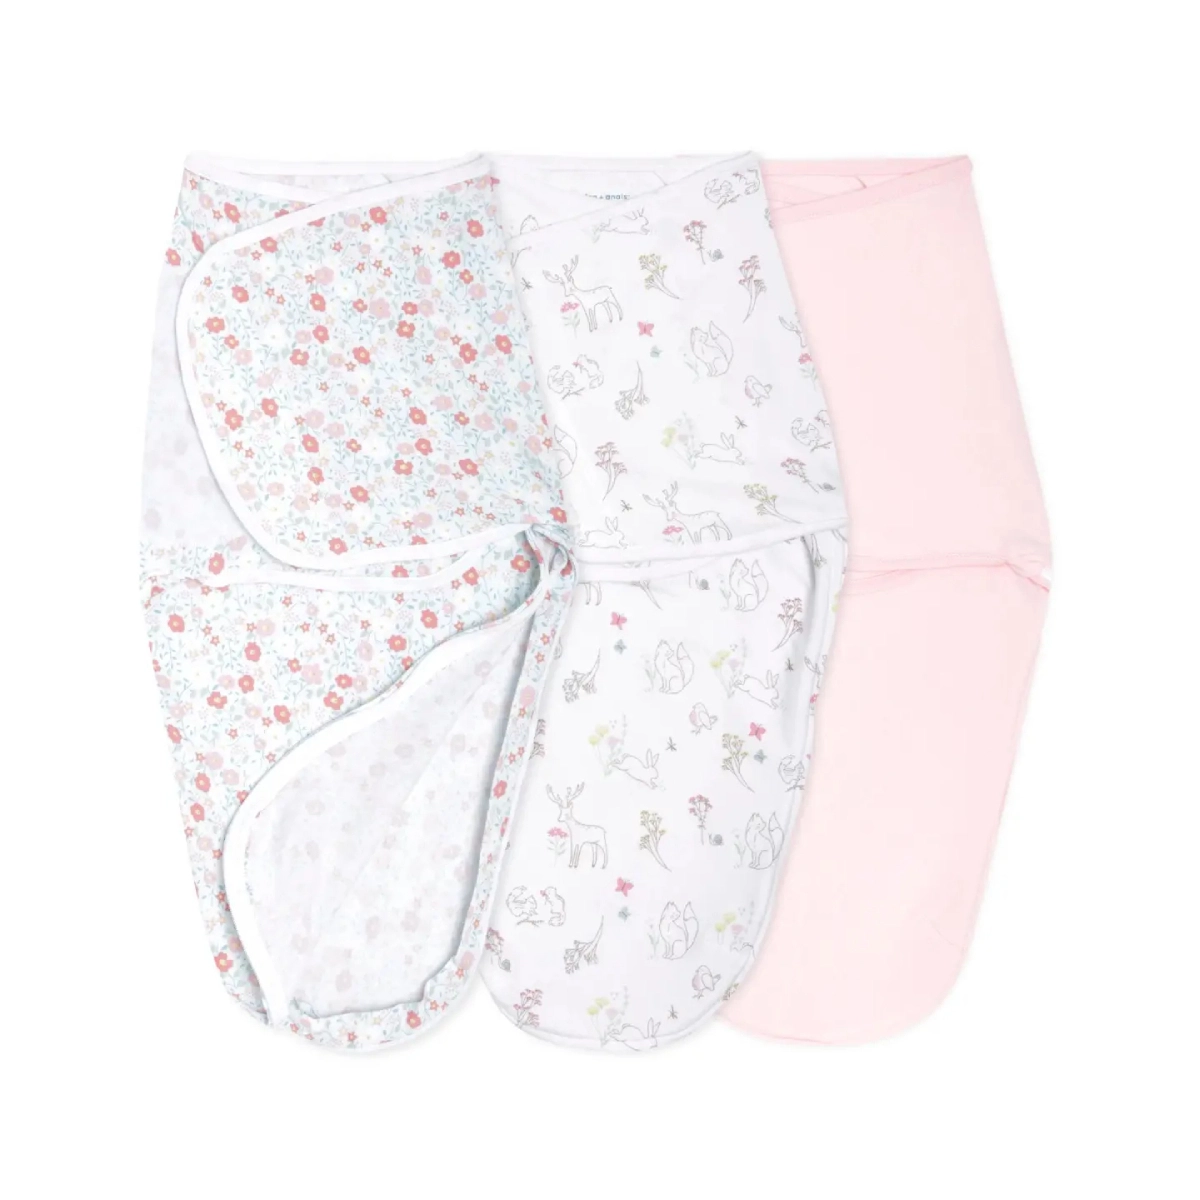 Image of Aden + Anais Pack of 3 Essential Easy Swaddle Wrap 1.0 TOG 0-3 Months - Fairy Tale Flowers (23-19-385)